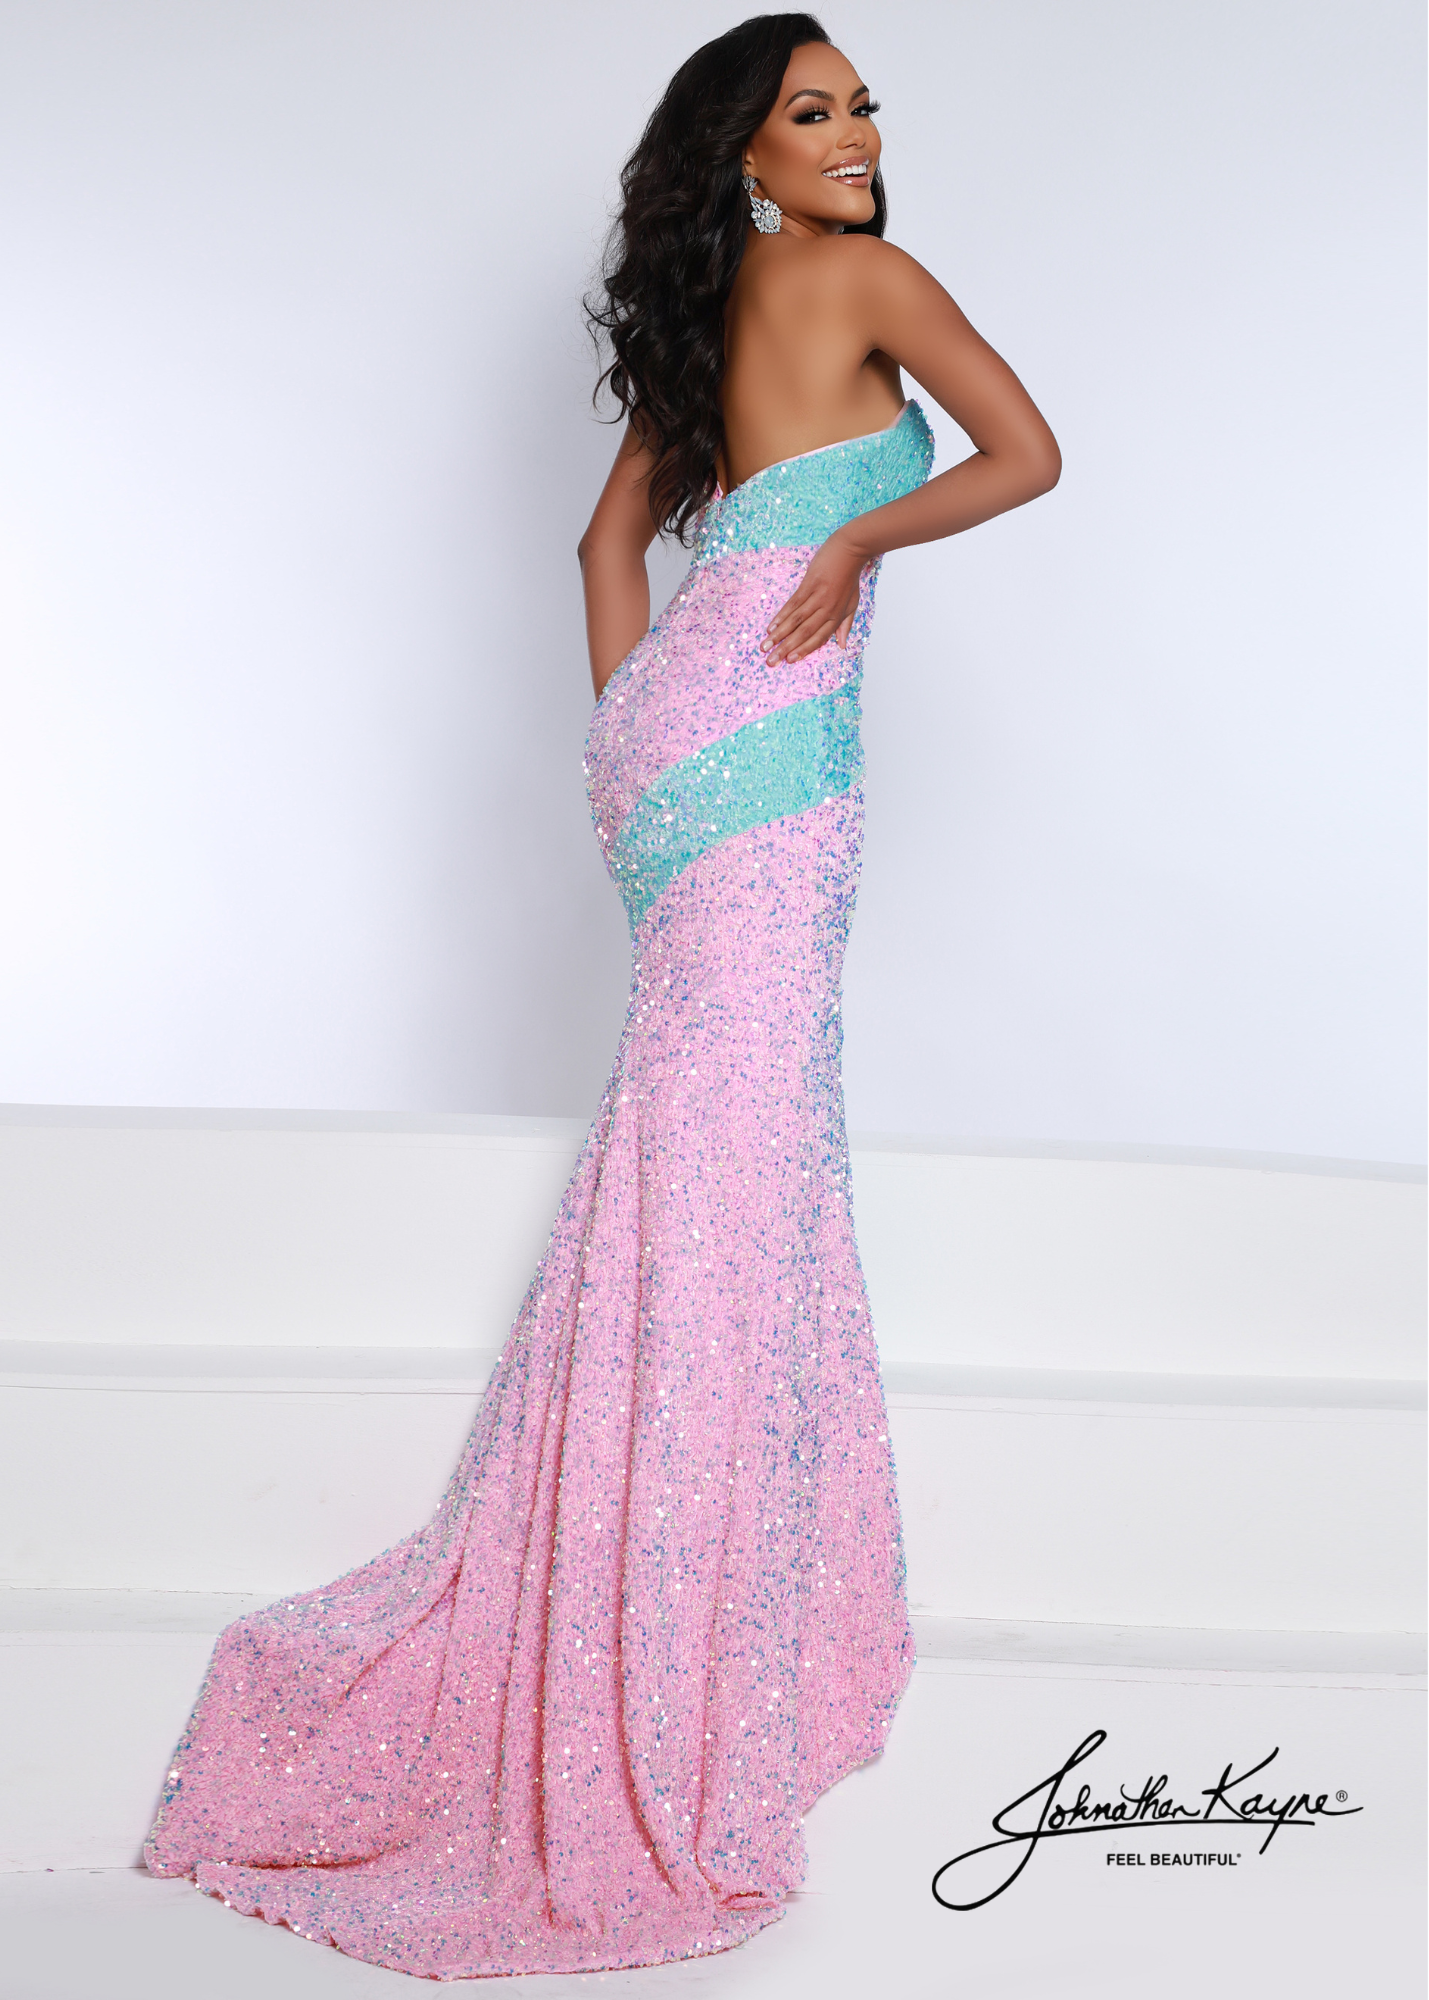 Johnathan Kayne 2659 One Shoulder Velvet Sequin Mermaid Prom Dress Pageant Gown Be daringly different in this two-tone sequin stretch velvet featuring a one-shoulder strap. The fit and flare silhouette is fantastic addition.  Colors: Aqua-White, Black-White, Cotton Candy-AQ, Multi-White  Sizes: 00, 0, 2, 4, 6, 8, 10, 12, 14, 16, 18, 20, 22  Fabric Sequin Stretch Velvet, Stretch Lining